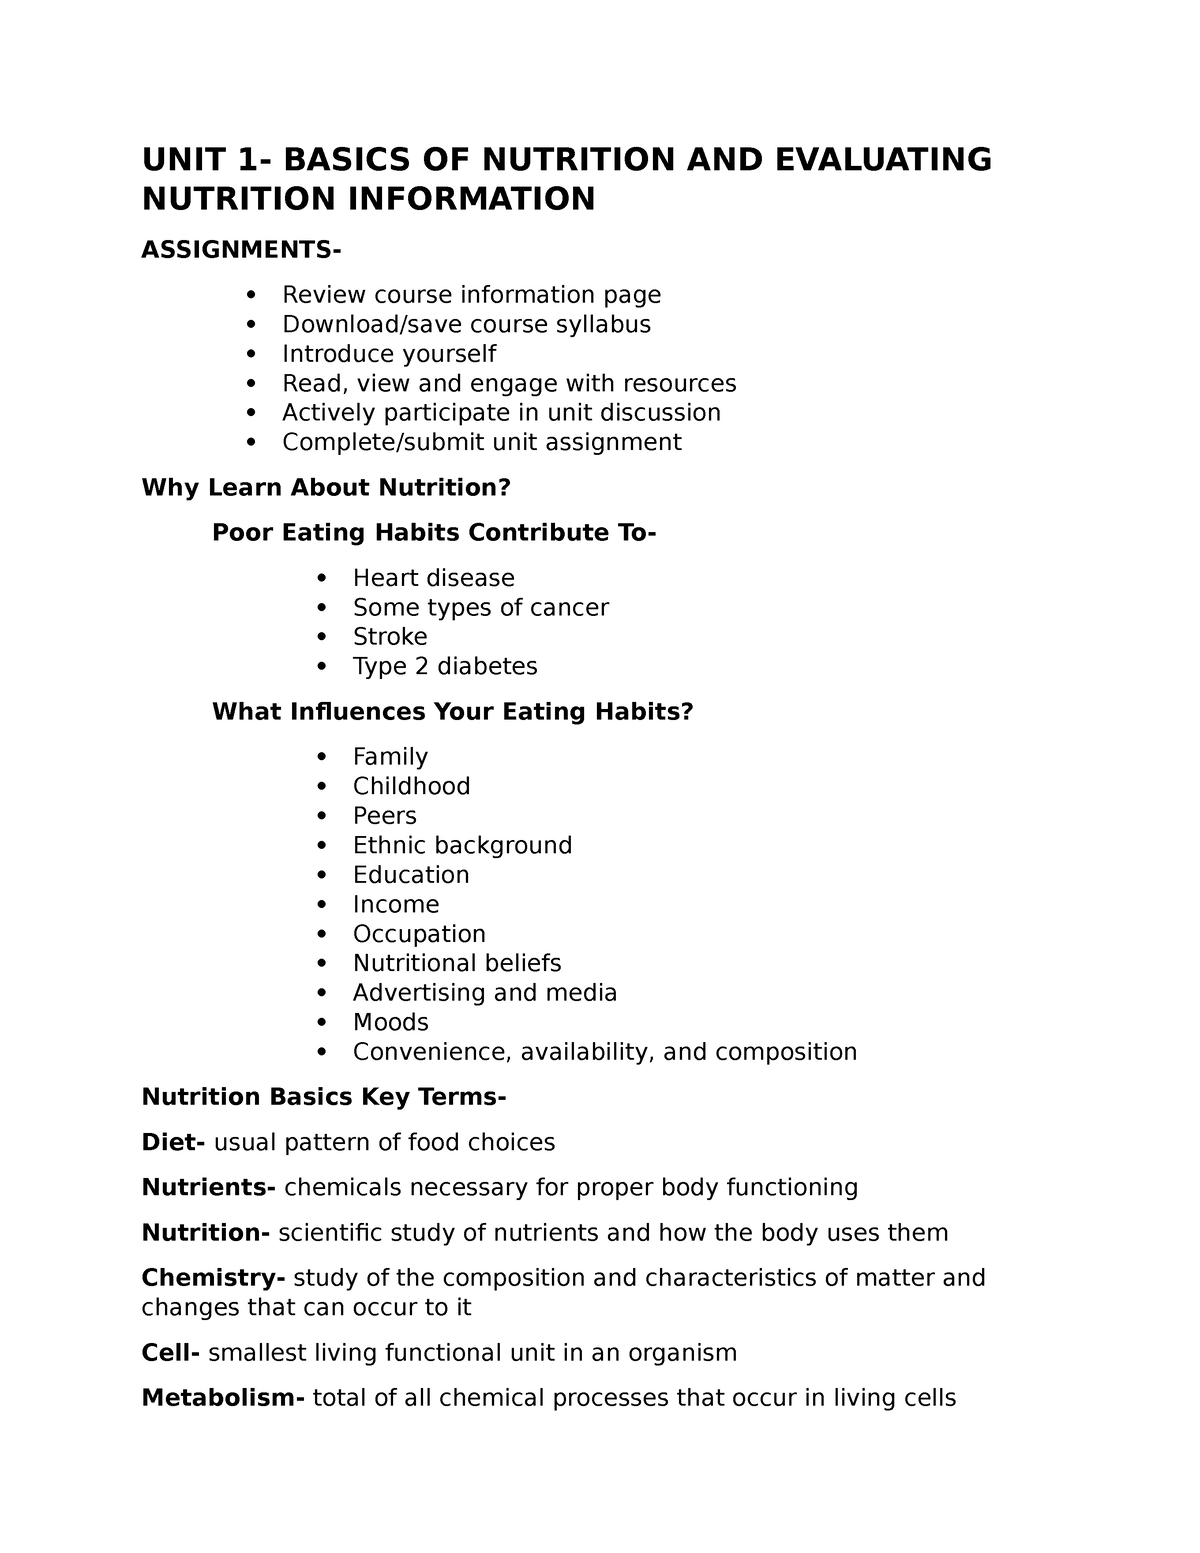 w03 assignment evaluating nutrition information